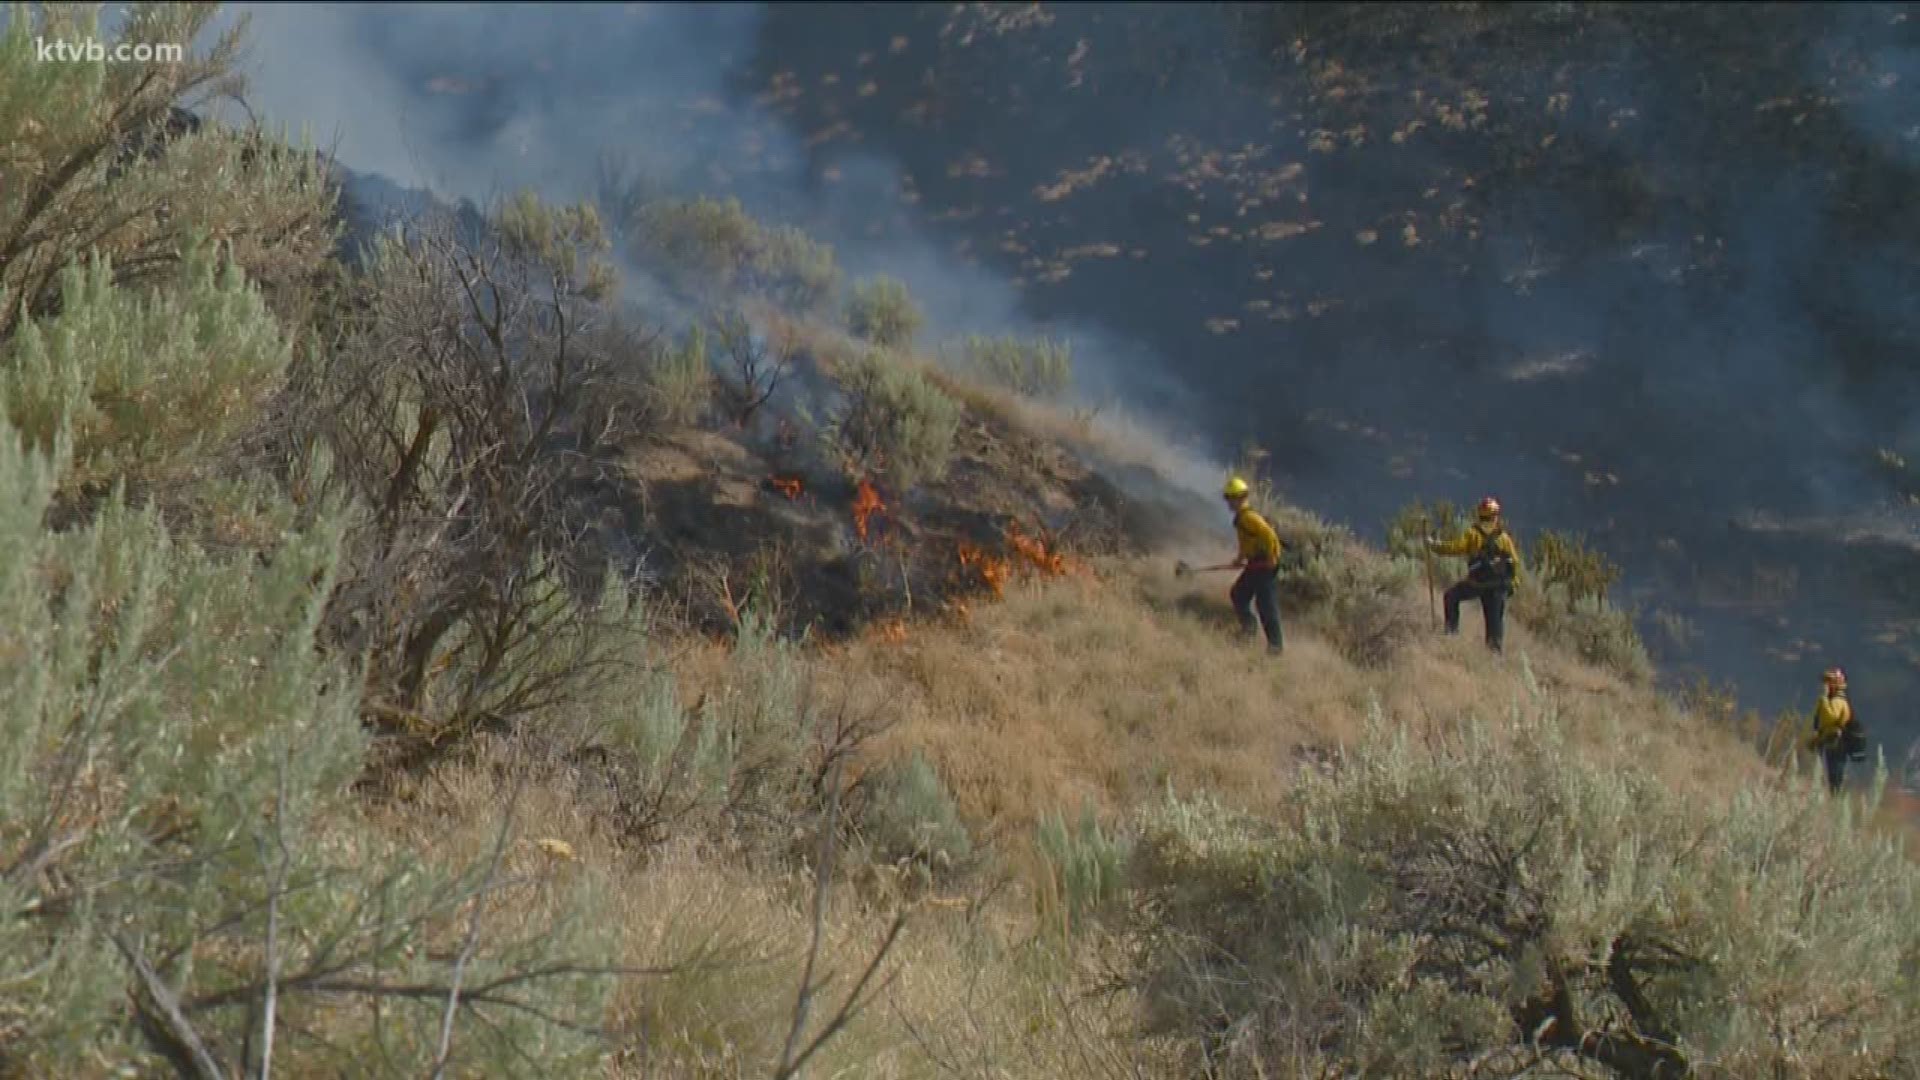 Boise Fire Department officials tell us some of the things you can do to keep safe this fire season.